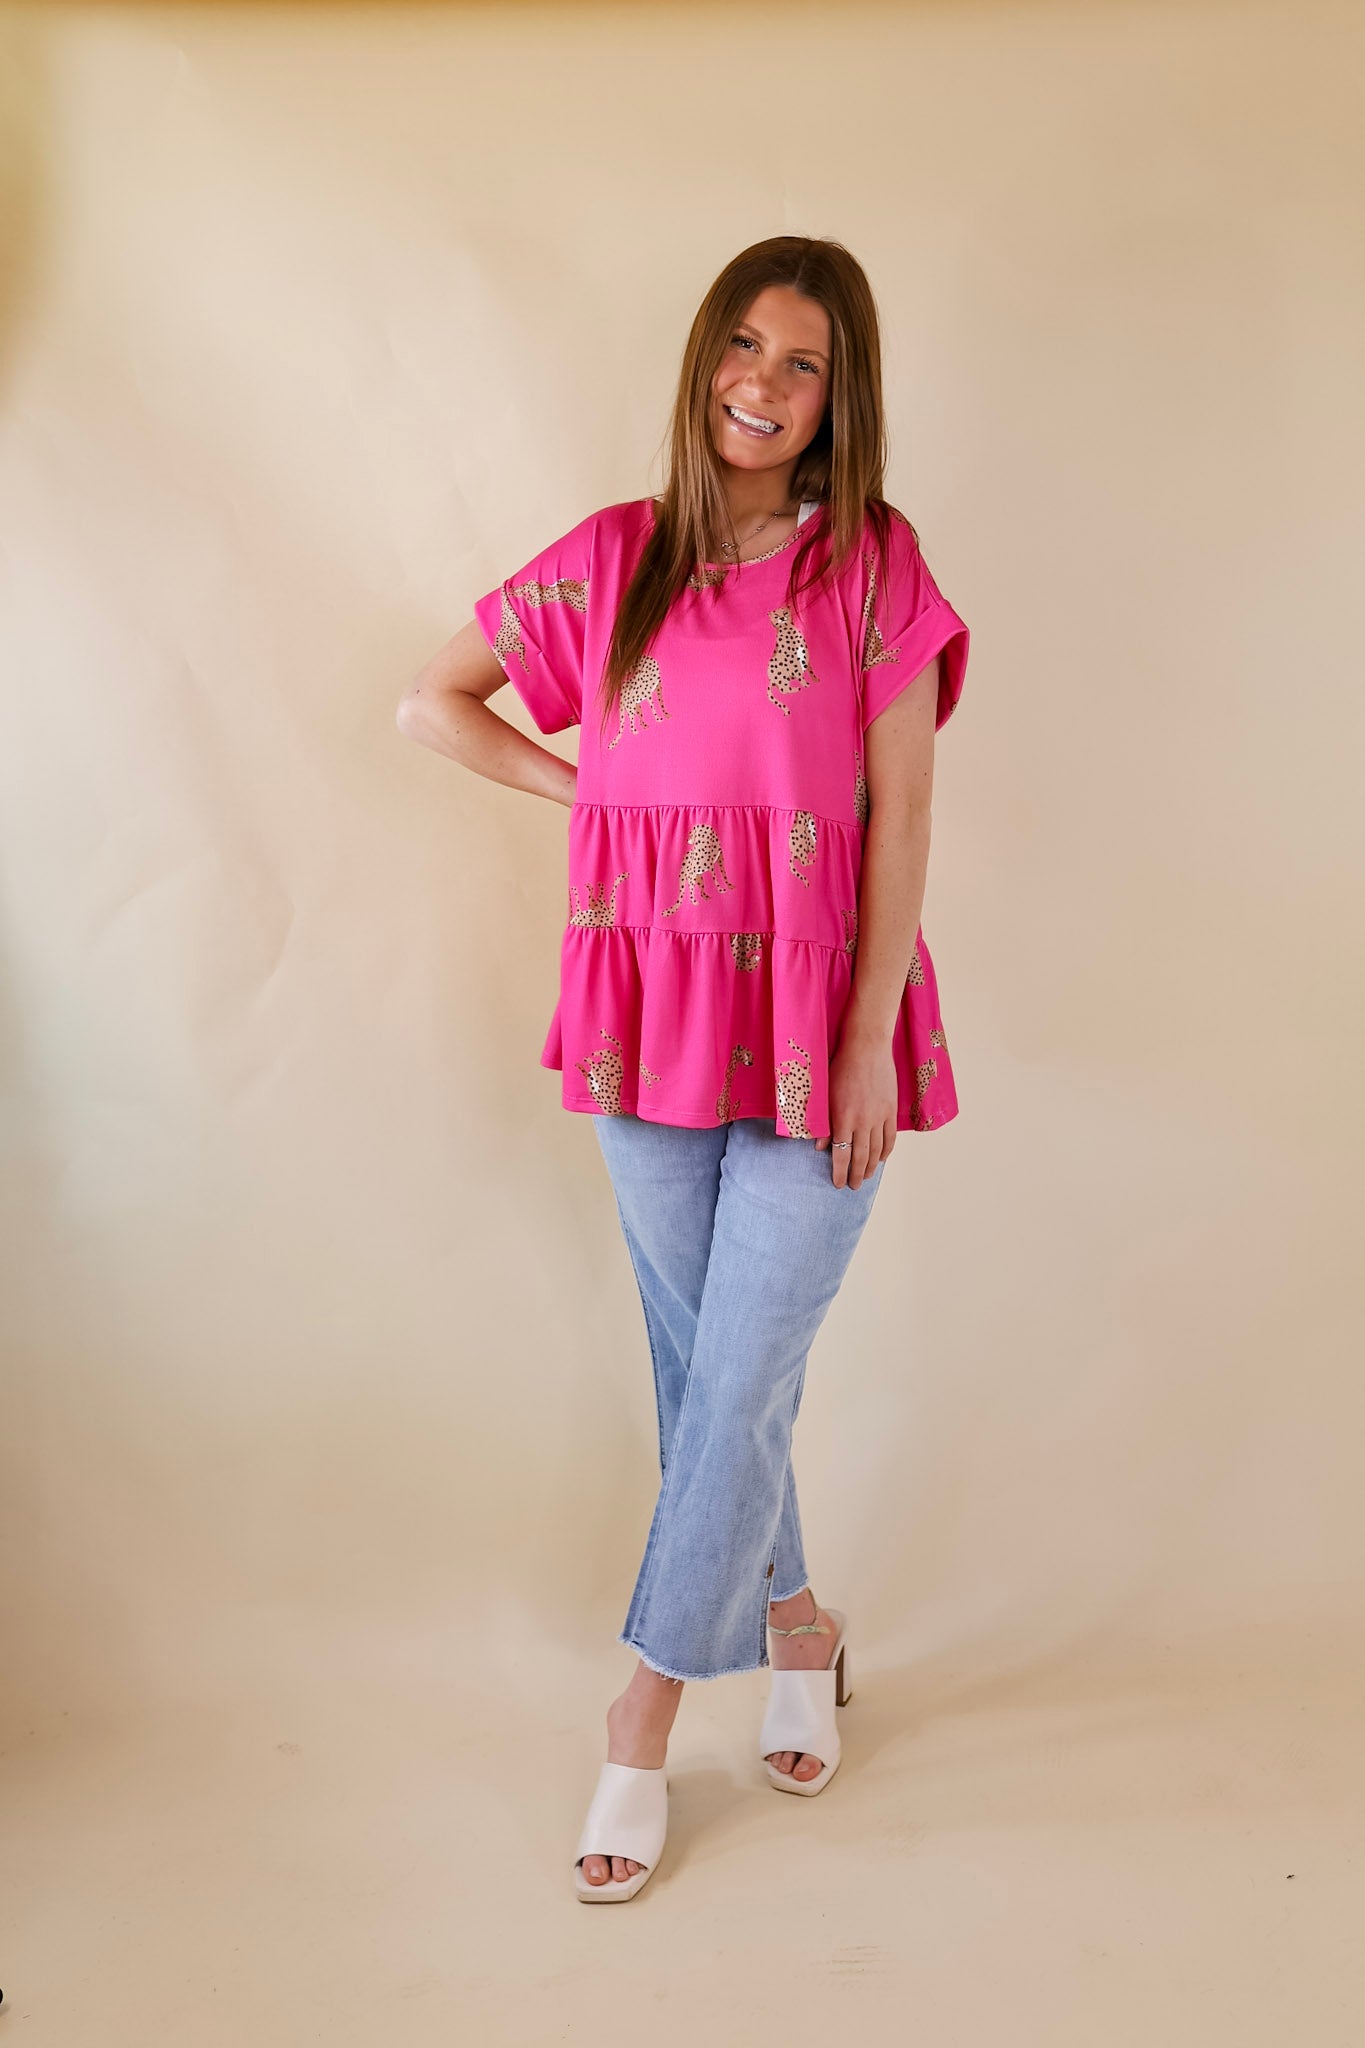 Feeling Wild Cheetah Print Tiered Babydoll Top in Hot Pink - Giddy Up Glamour Boutique